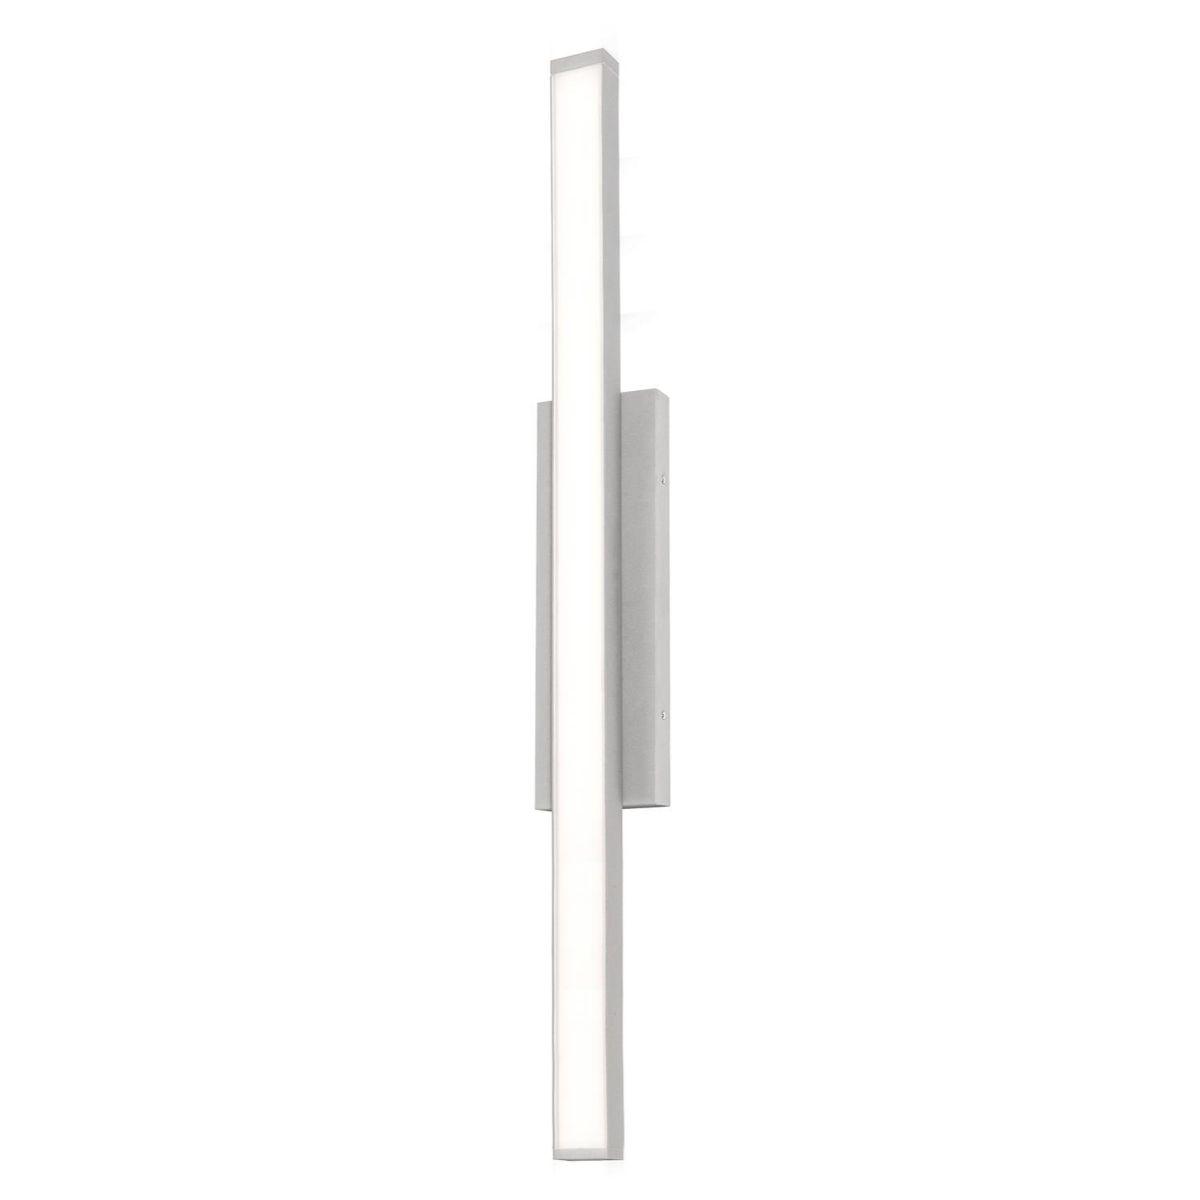 Gale 36 in. LED Outdoor Wall Sconce 1400 lumens 3000K